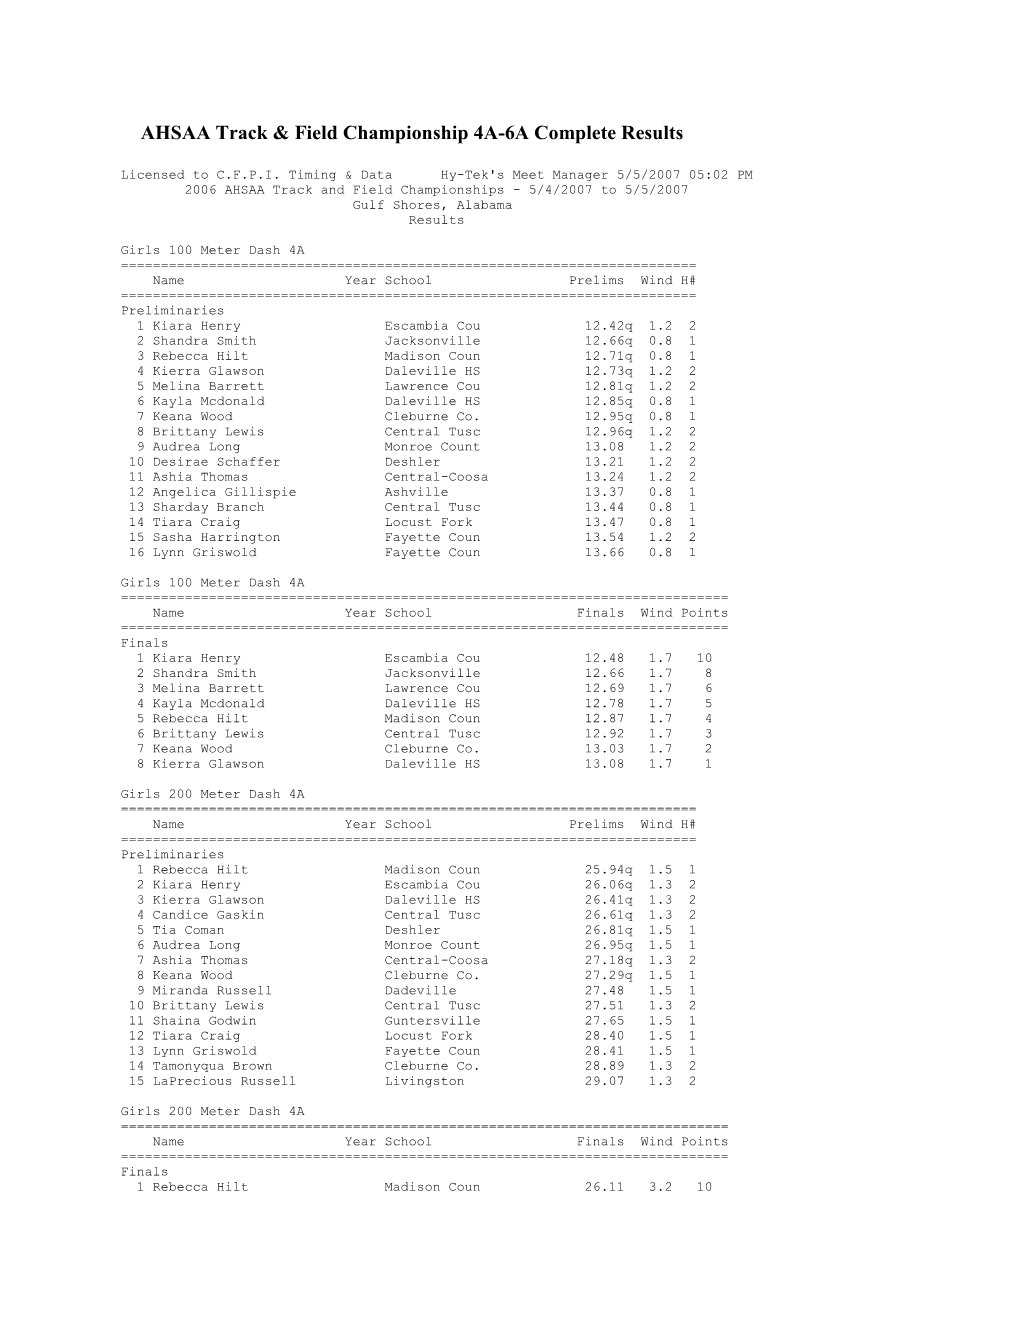 AHSAA Track & Field Championship 4A-6A Complete Results